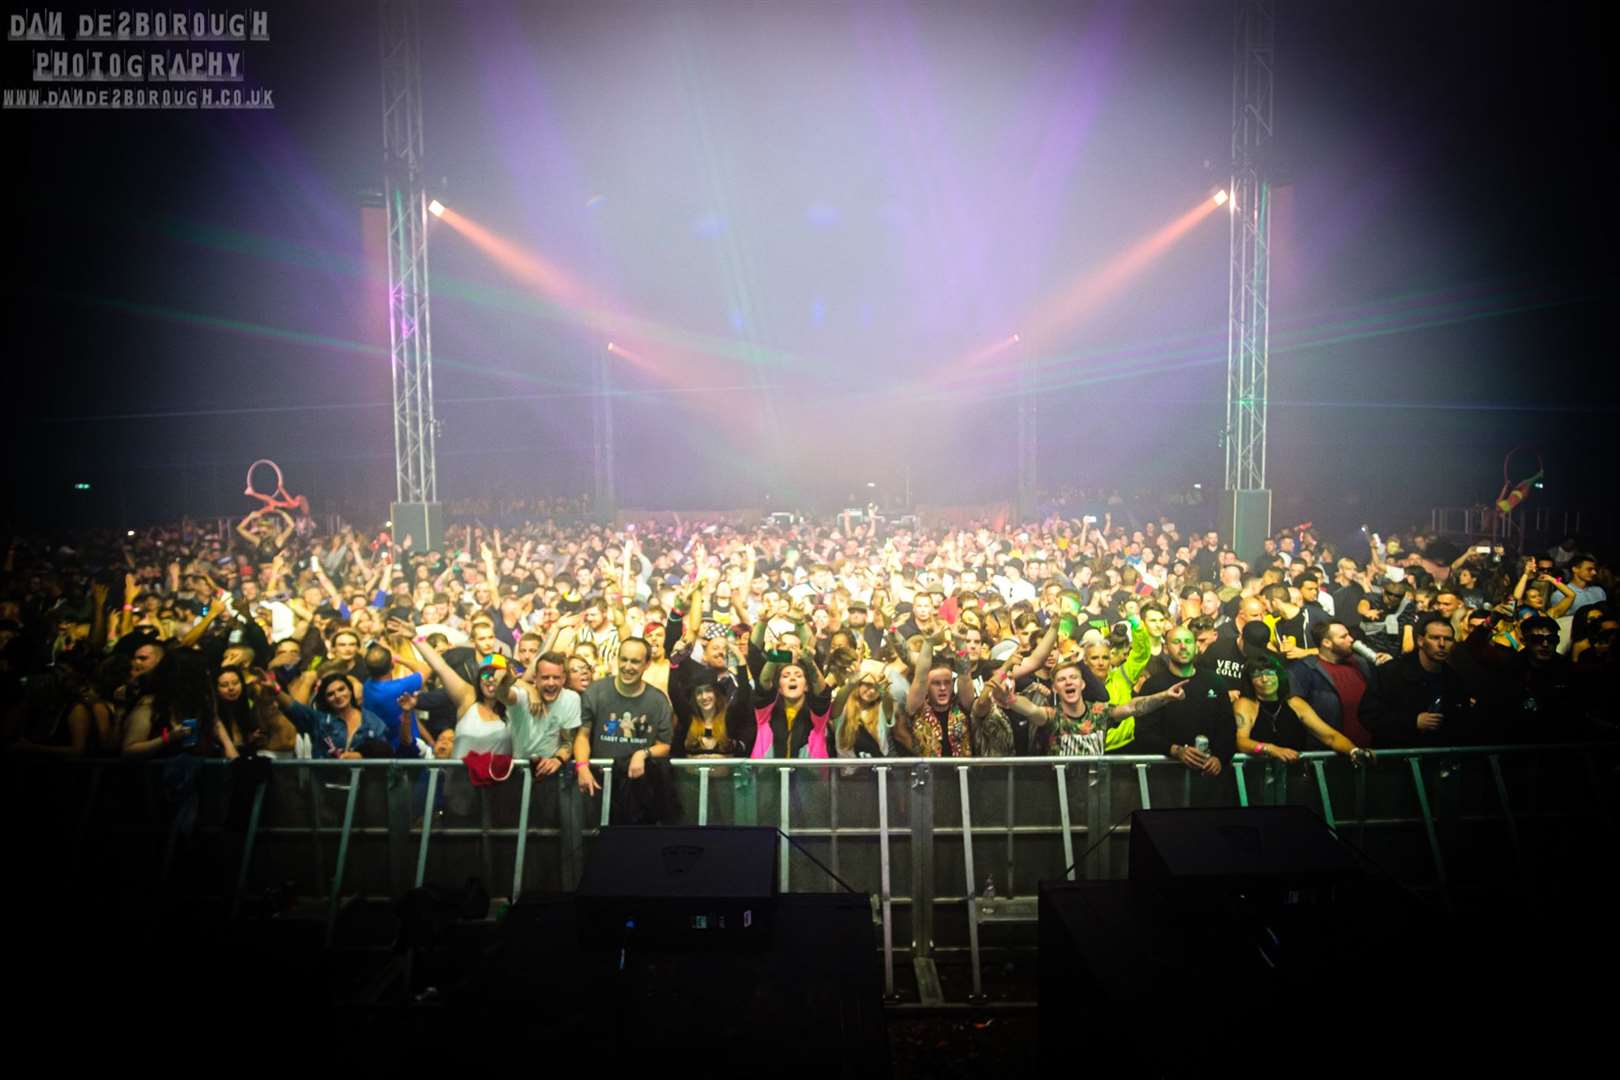 Thousands of people attended the first Connected festival. Photo: Dan Desborough